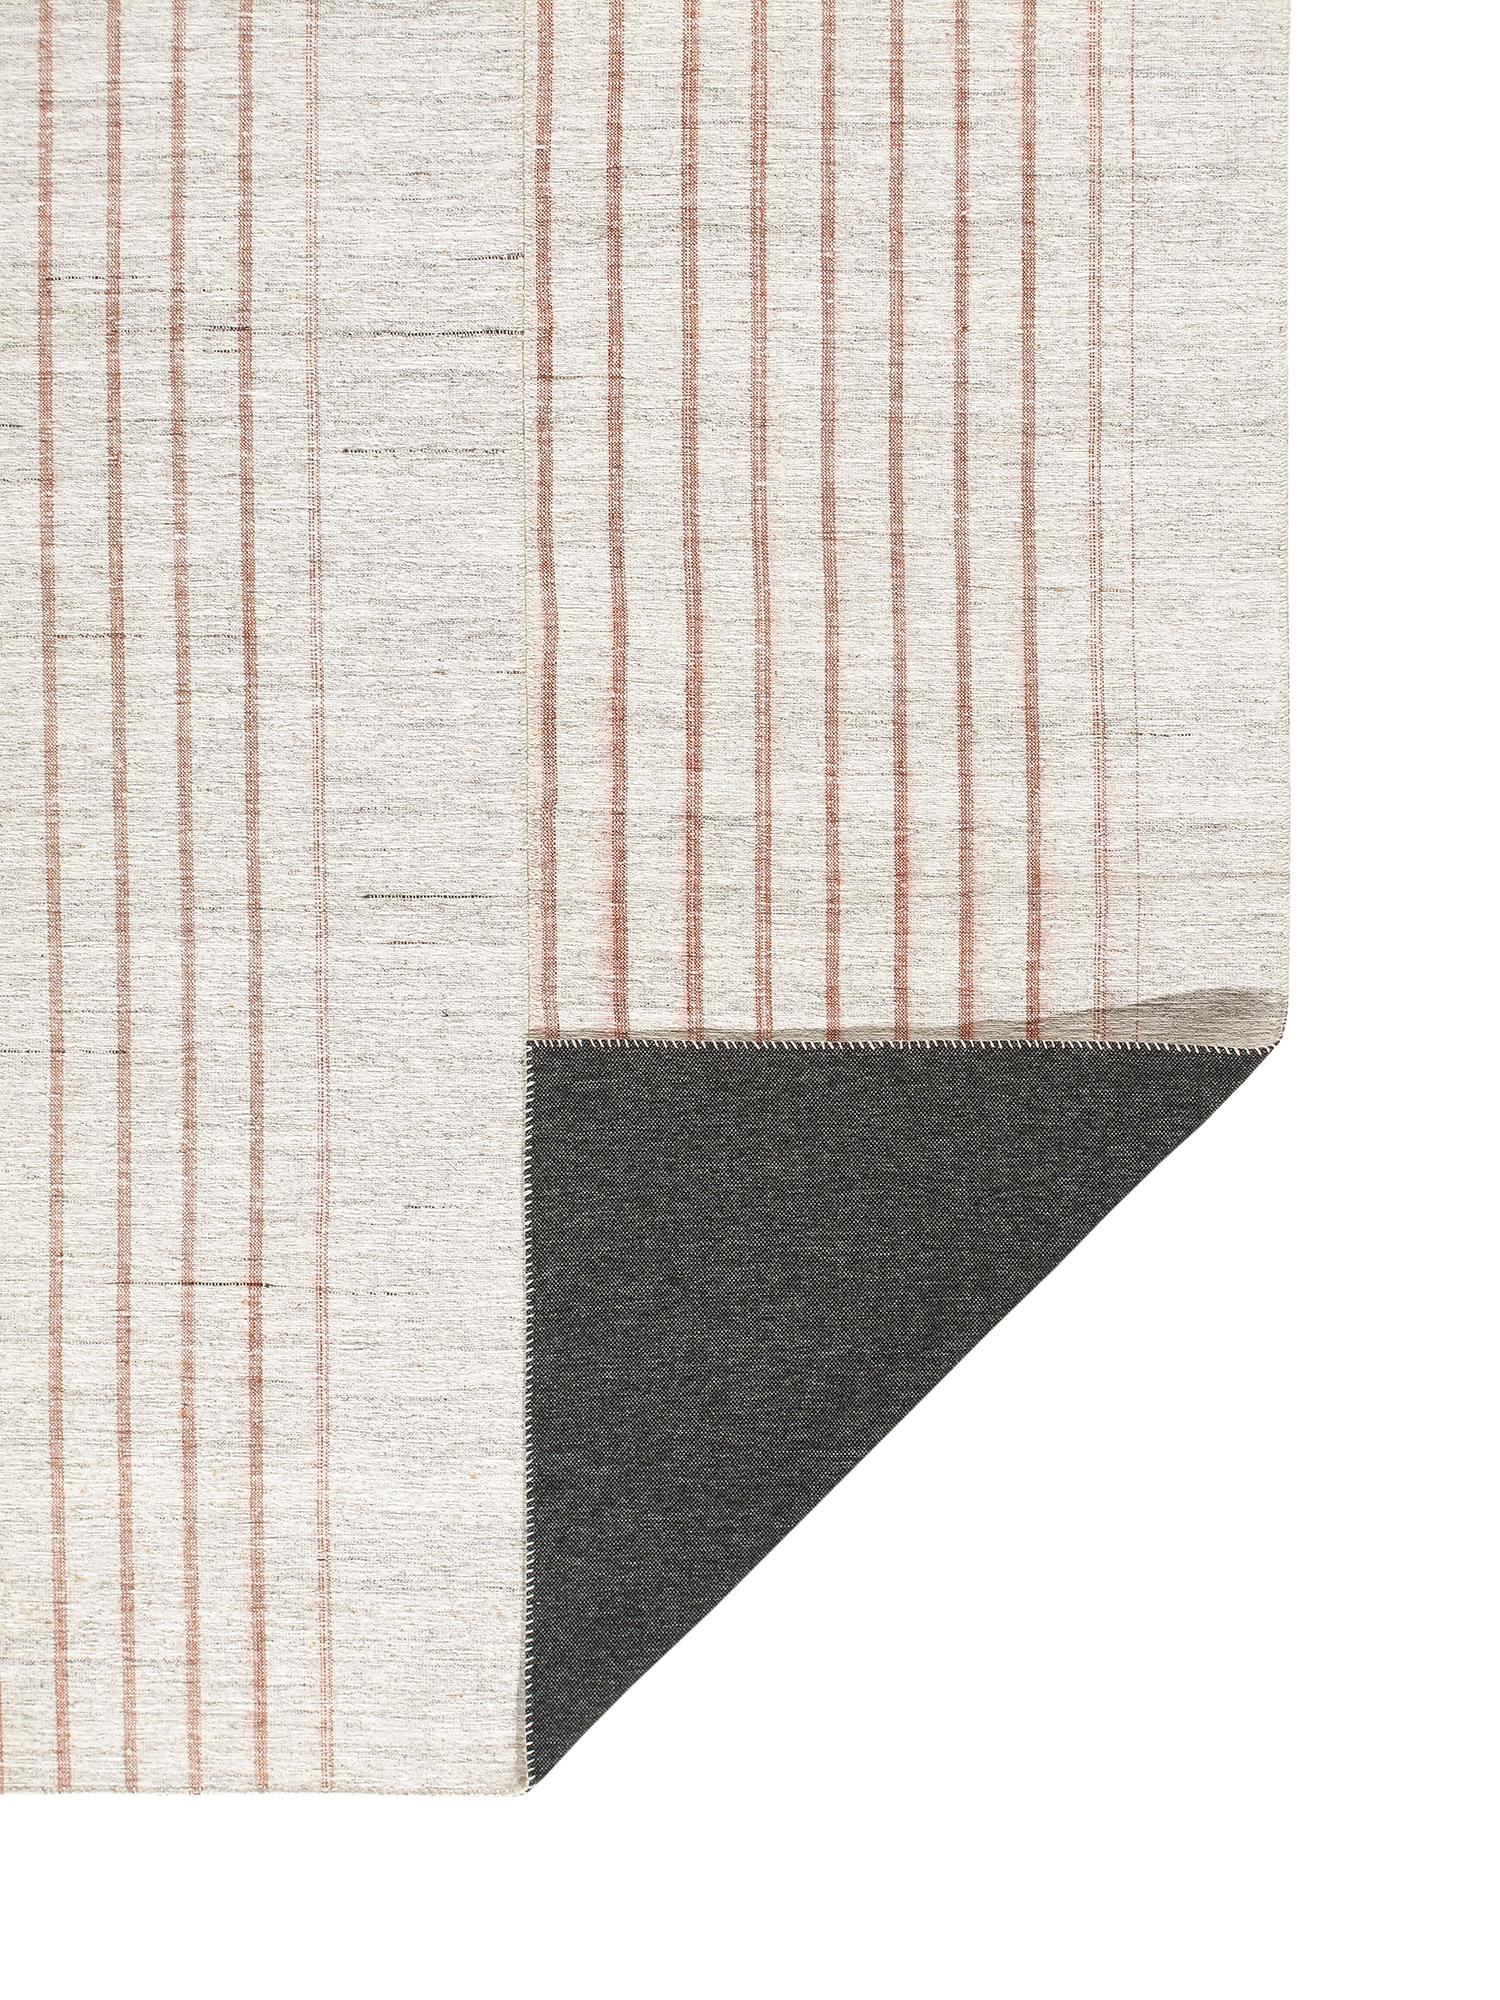 Hand-Woven Vintage Striped Neutral Toned Pelas Rug  For Sale